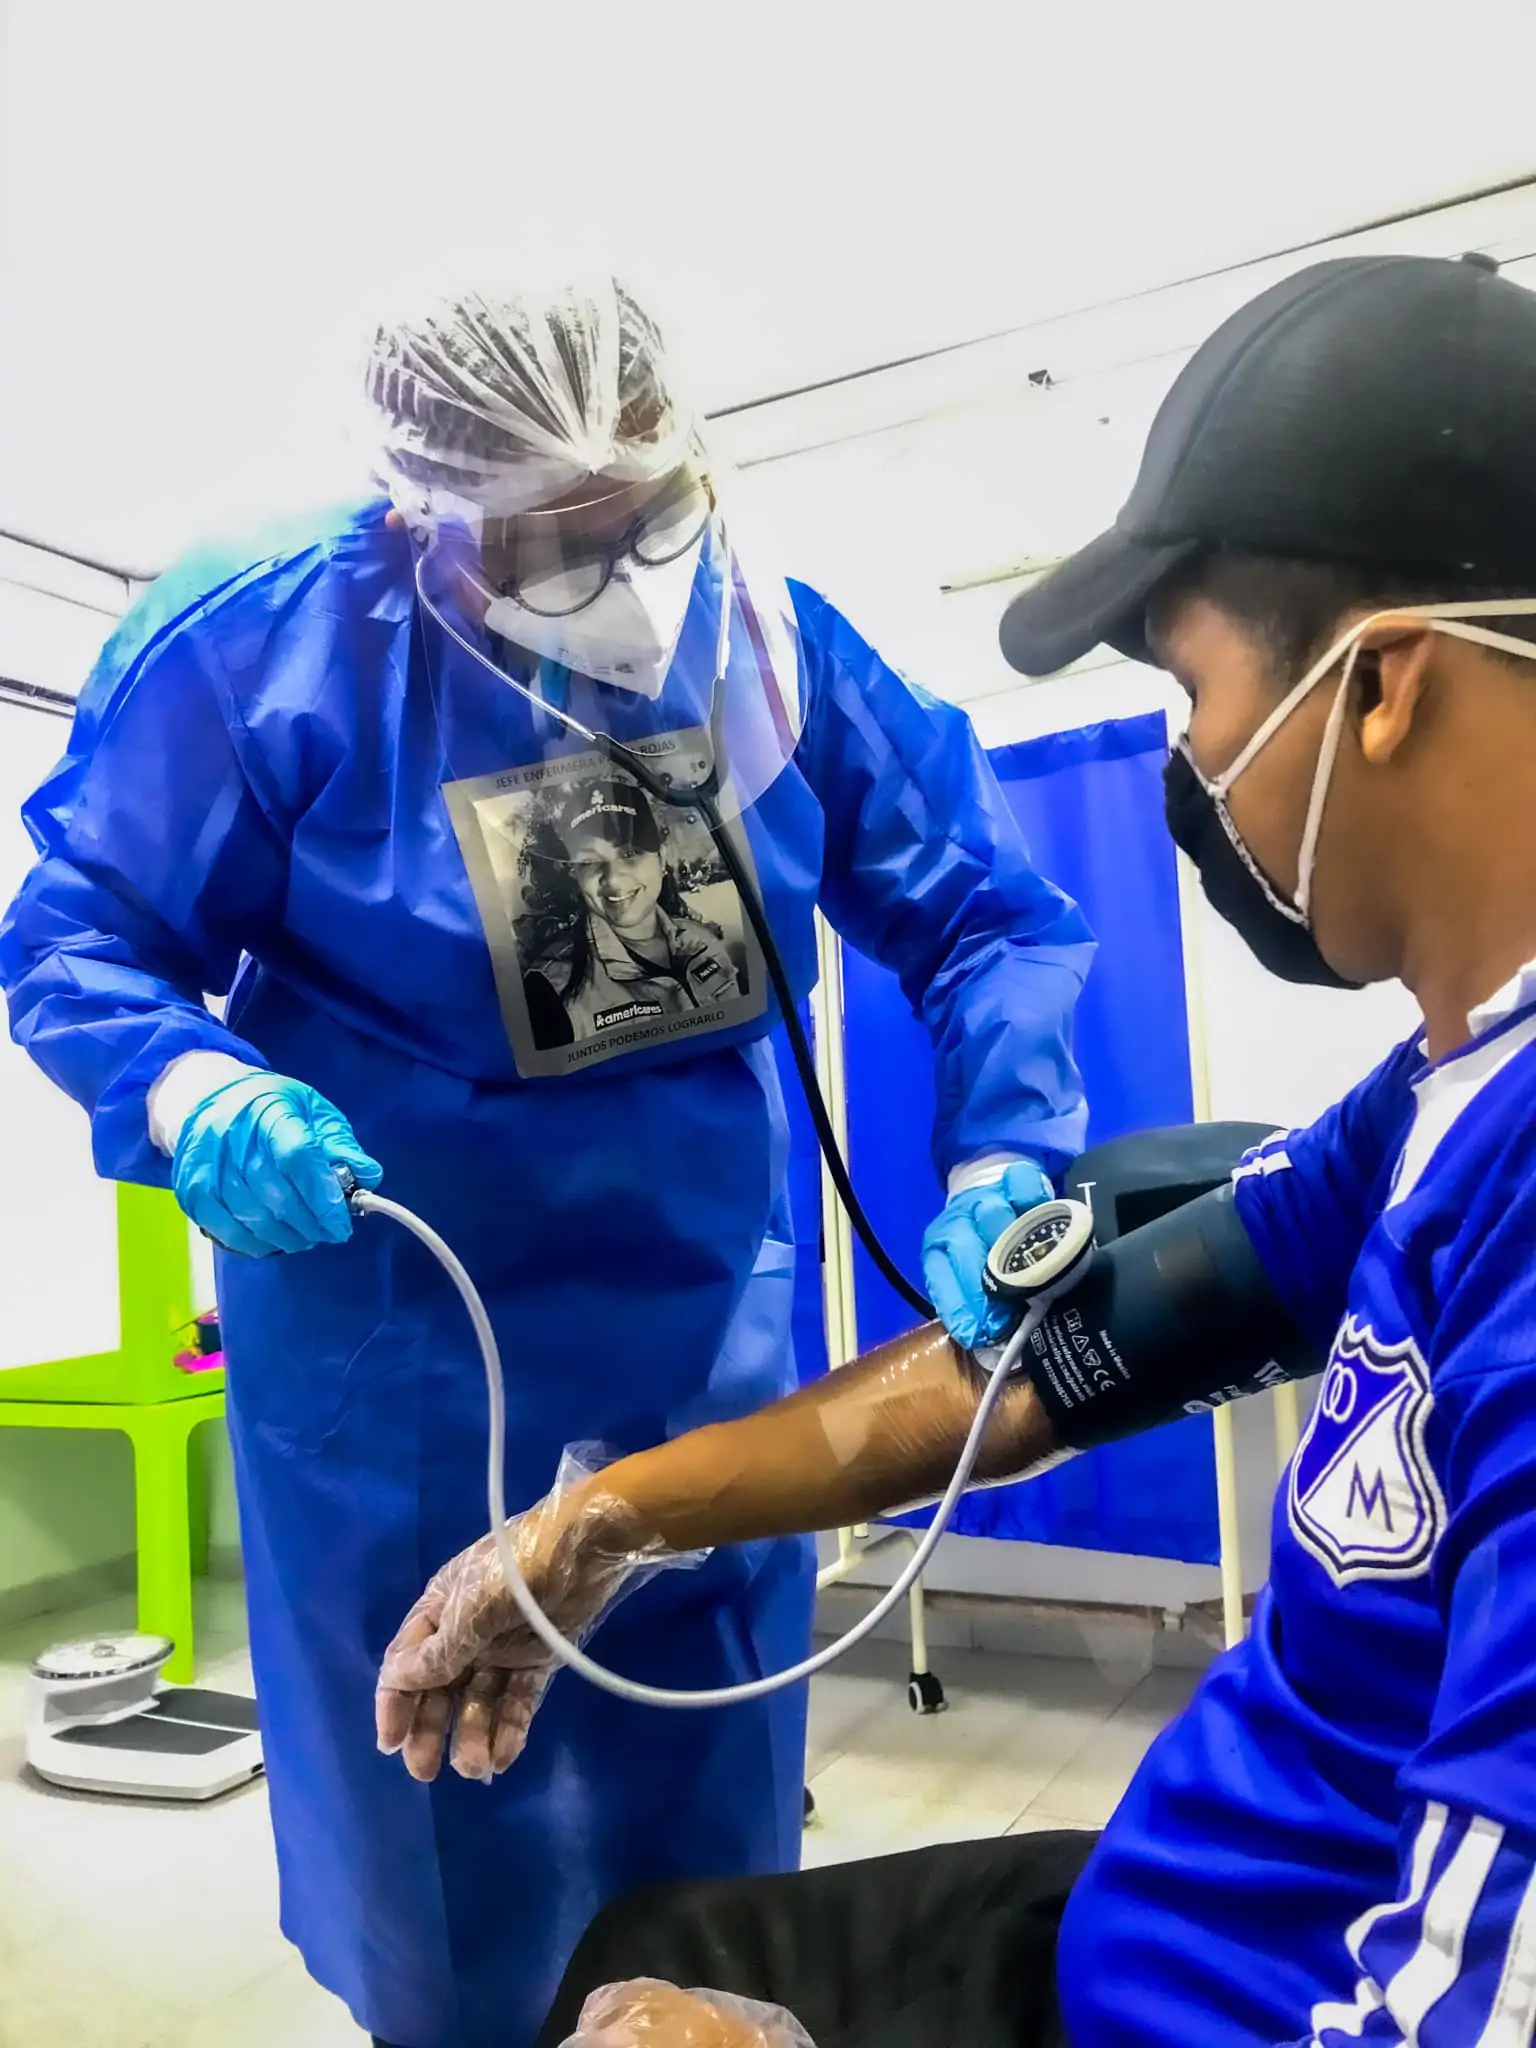 Clinic health worker in full PPE gear and nameplate checks the blood pressure of a patient wearing a mask and baseball cap.